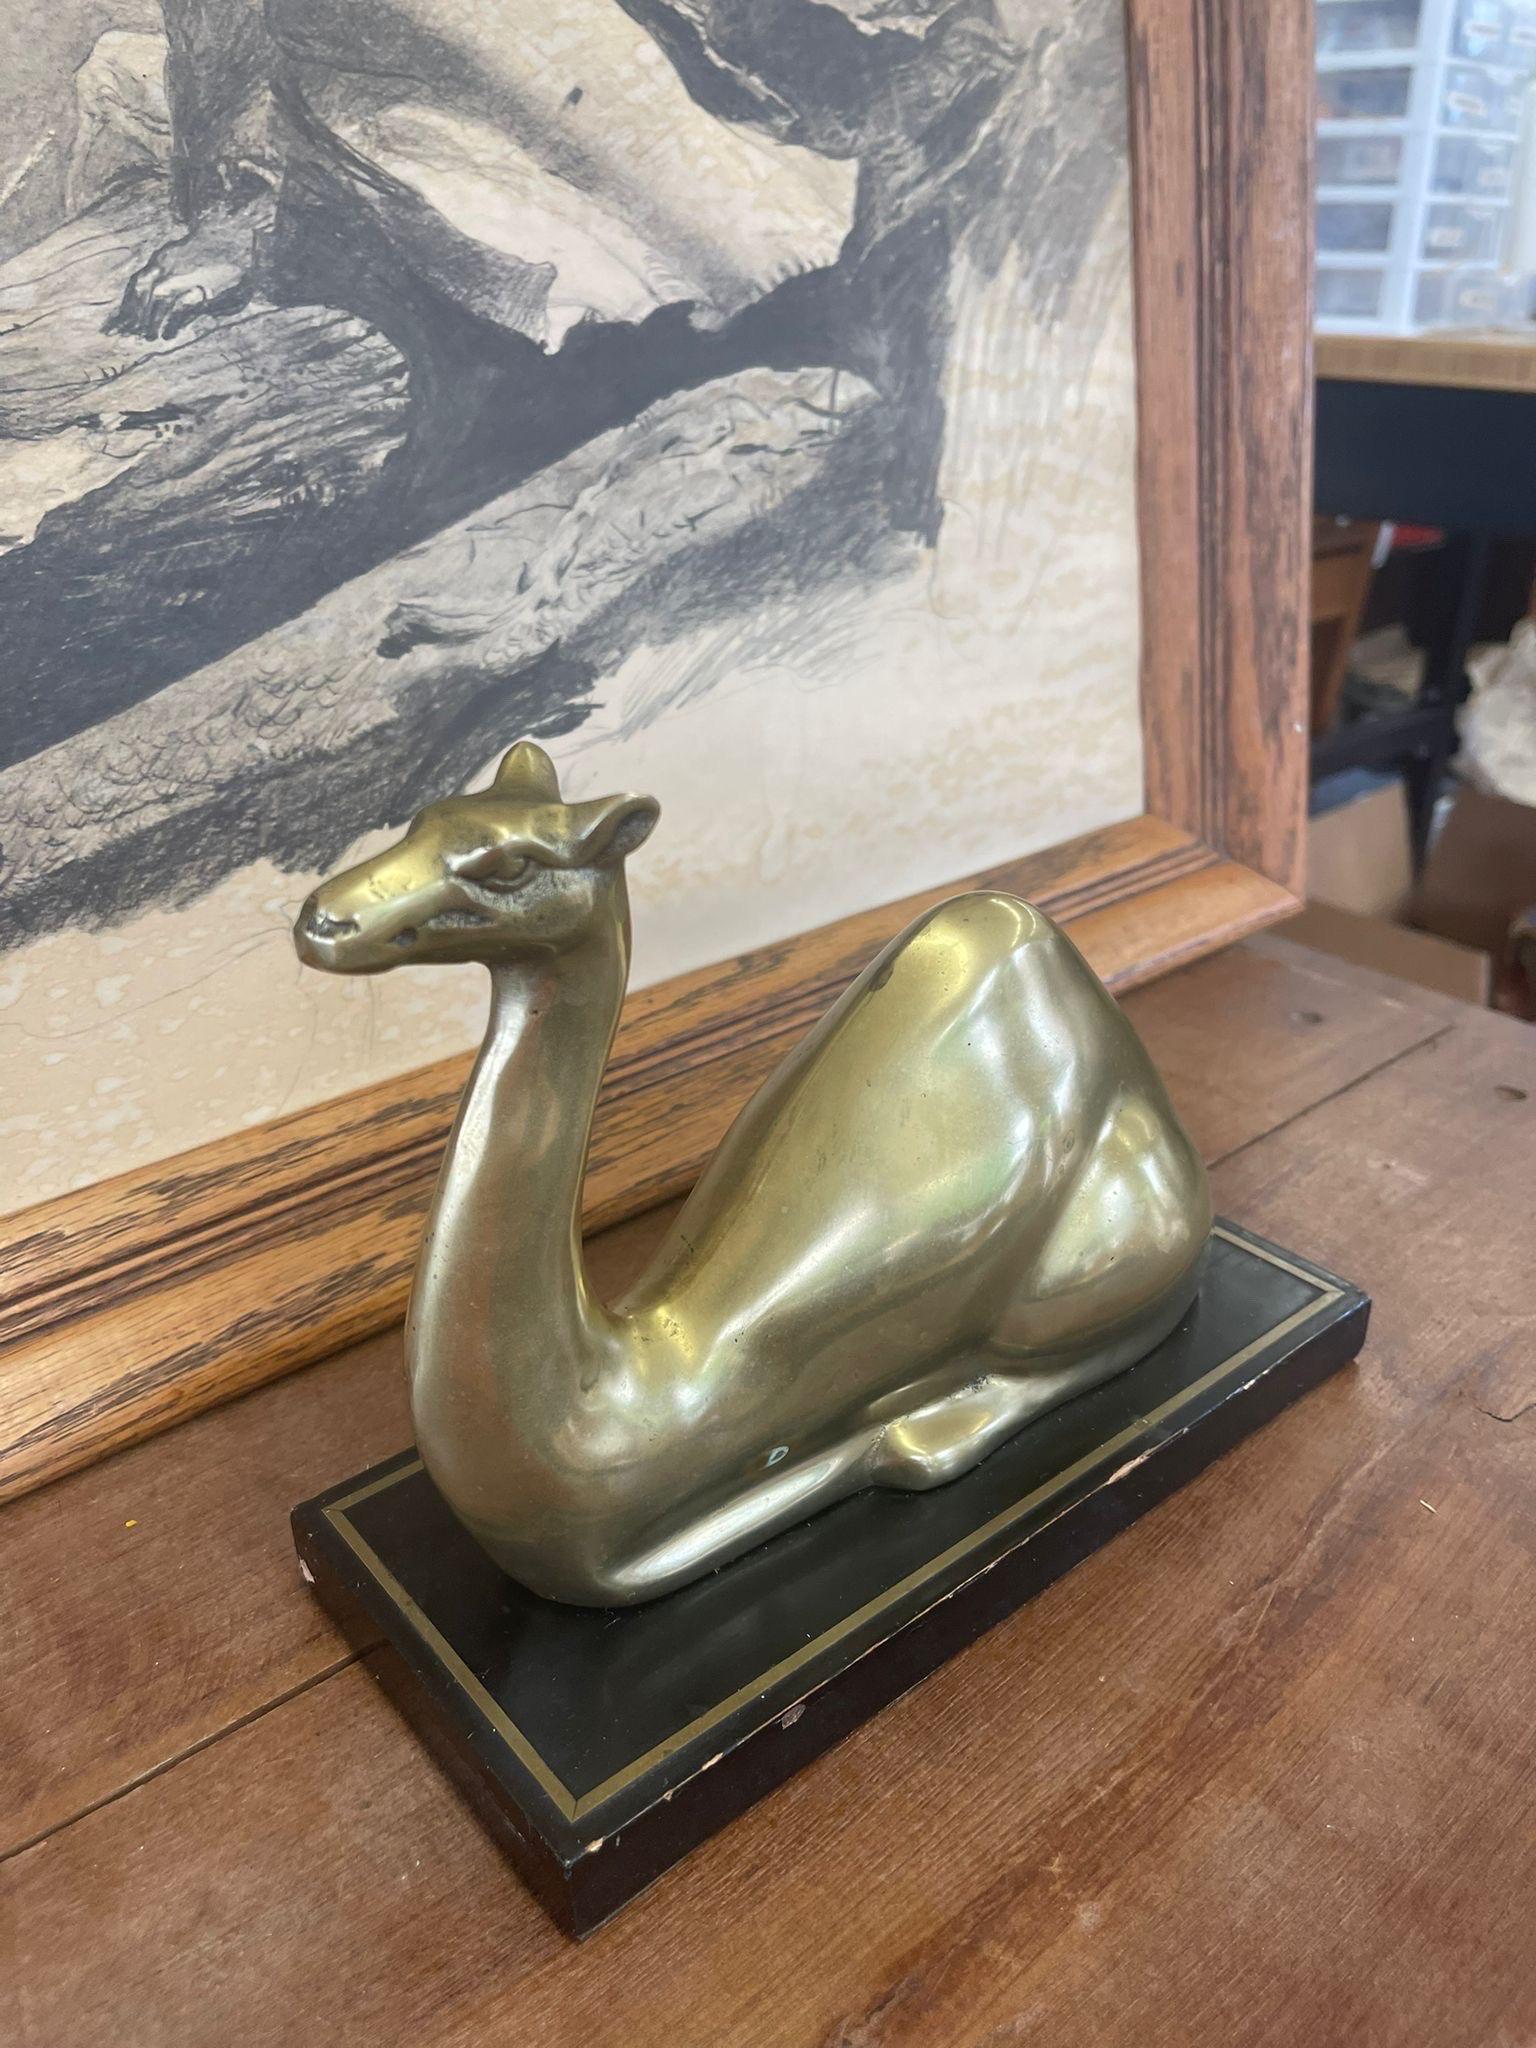 Camel Figurine on a Wooden Base. Possibly Brass, Slight Petina on a Gold Tone. Vintage Condition Consistent with Age.

Dimensions. 9 W ; 4 D ; 7 H